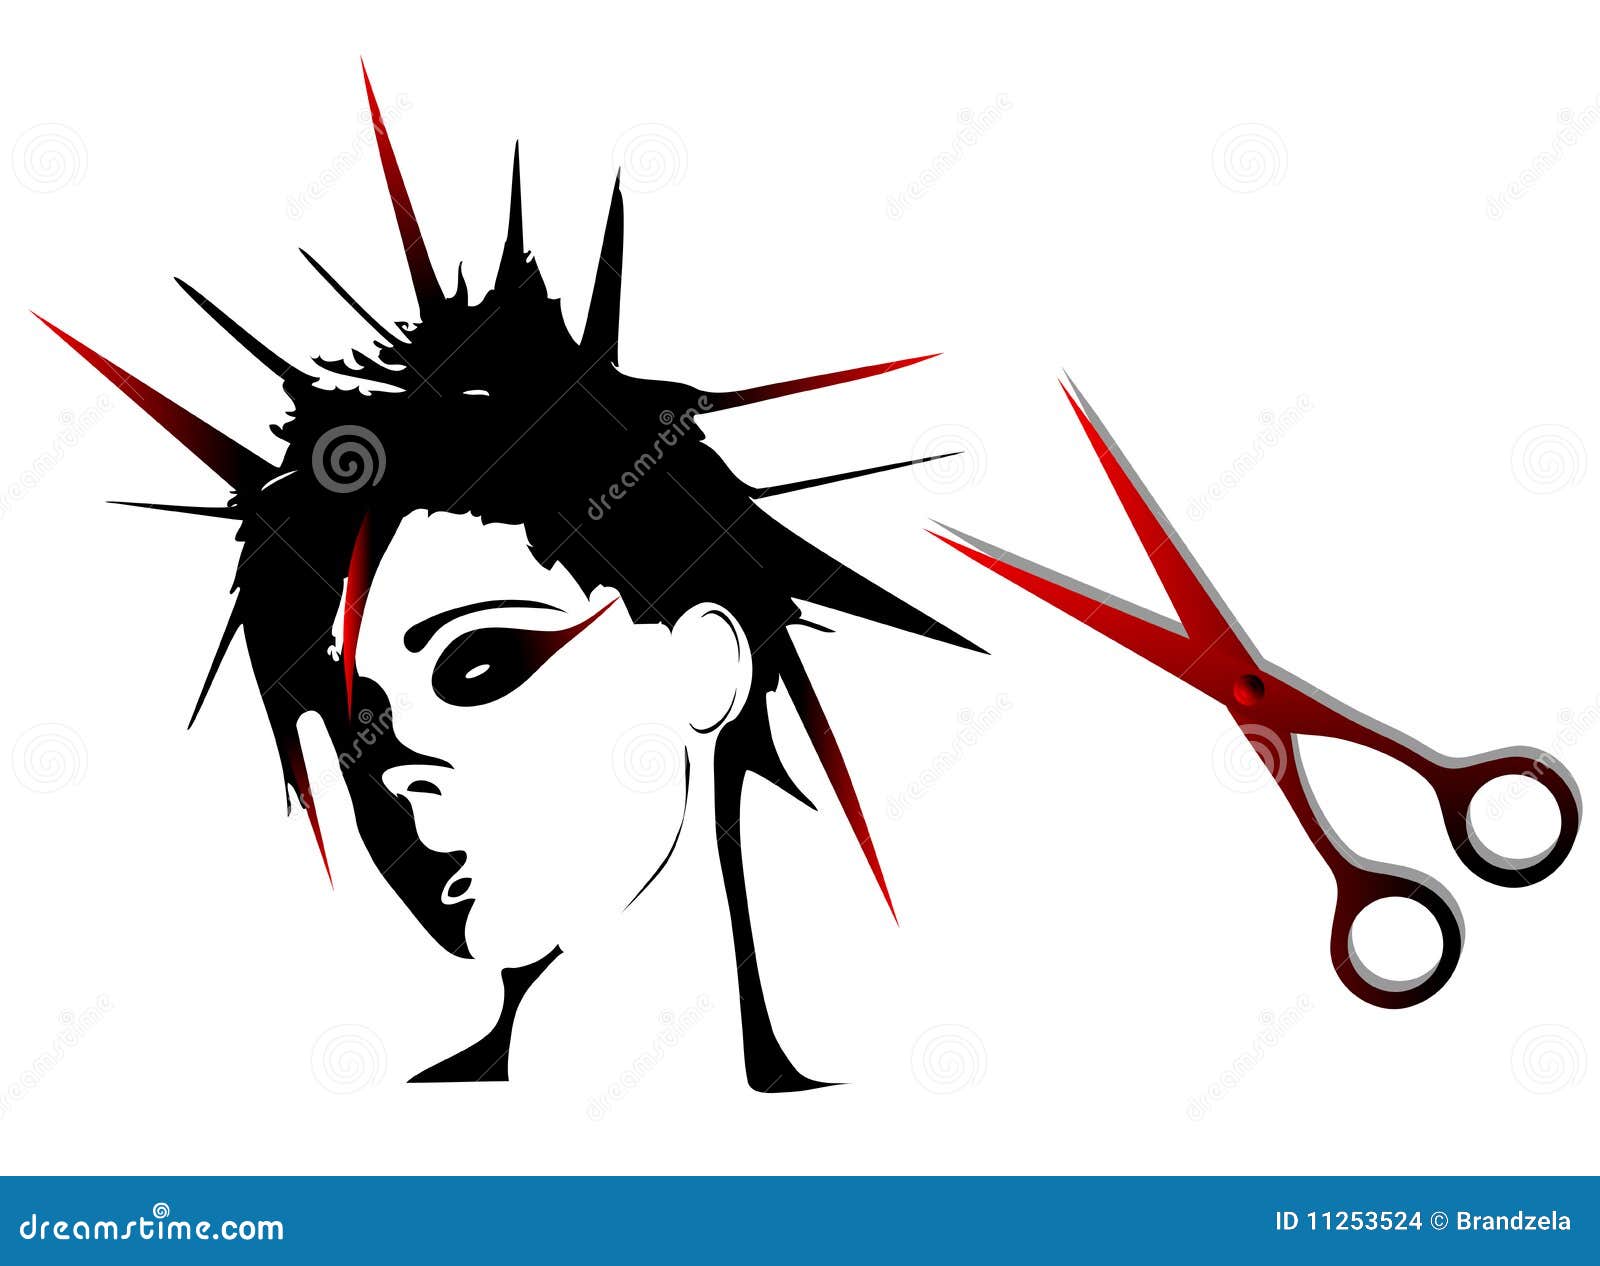 Woman punk hairstyles stock vector. Illustration of haircutting - 11253524